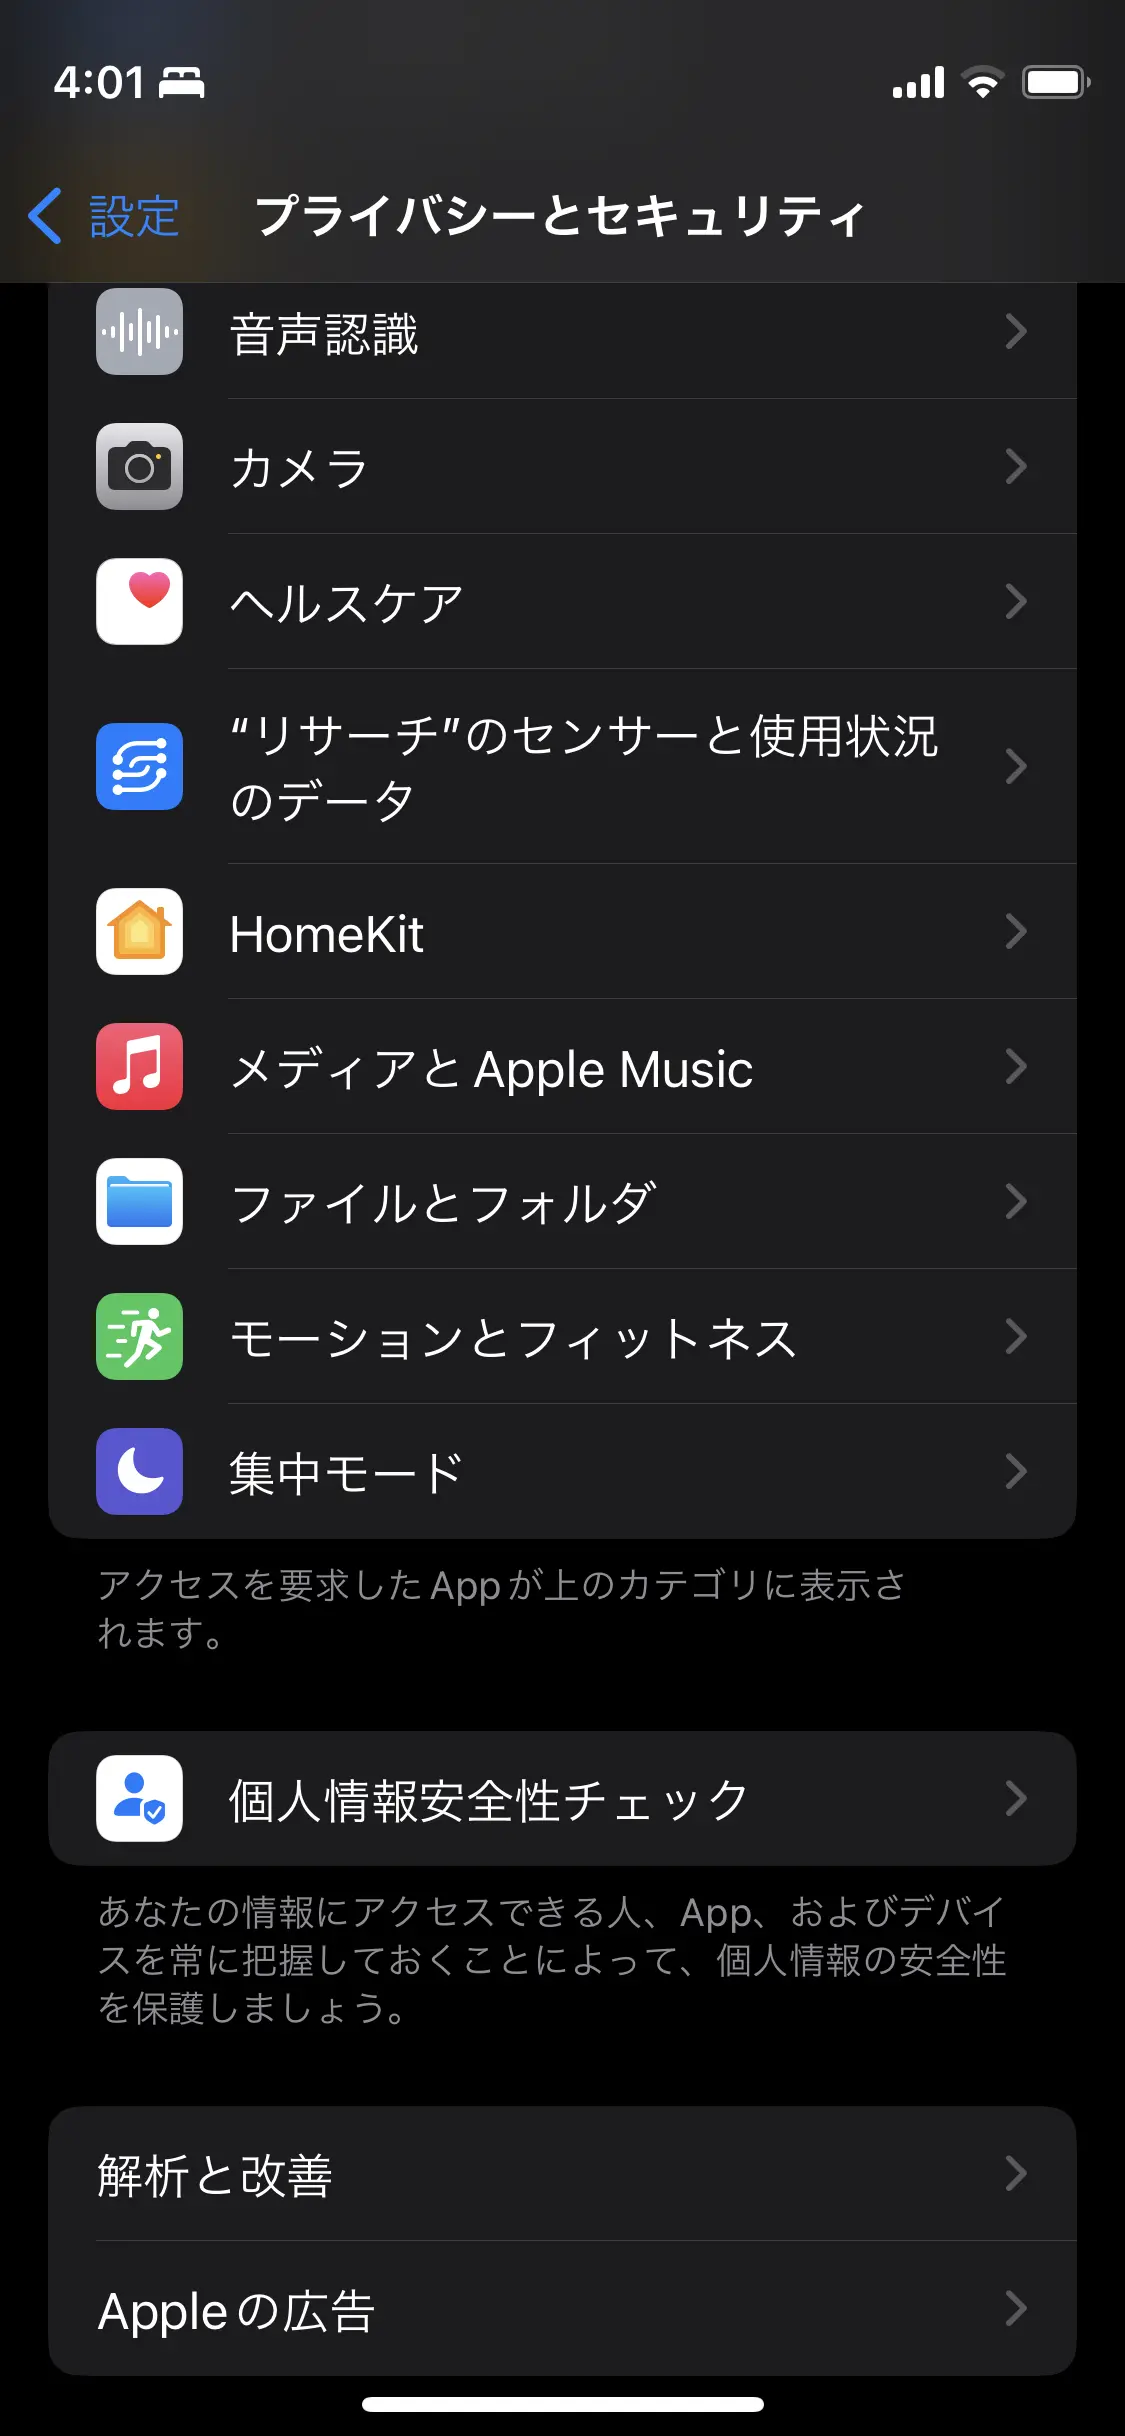 iPhoneの充電回数の確認方法。